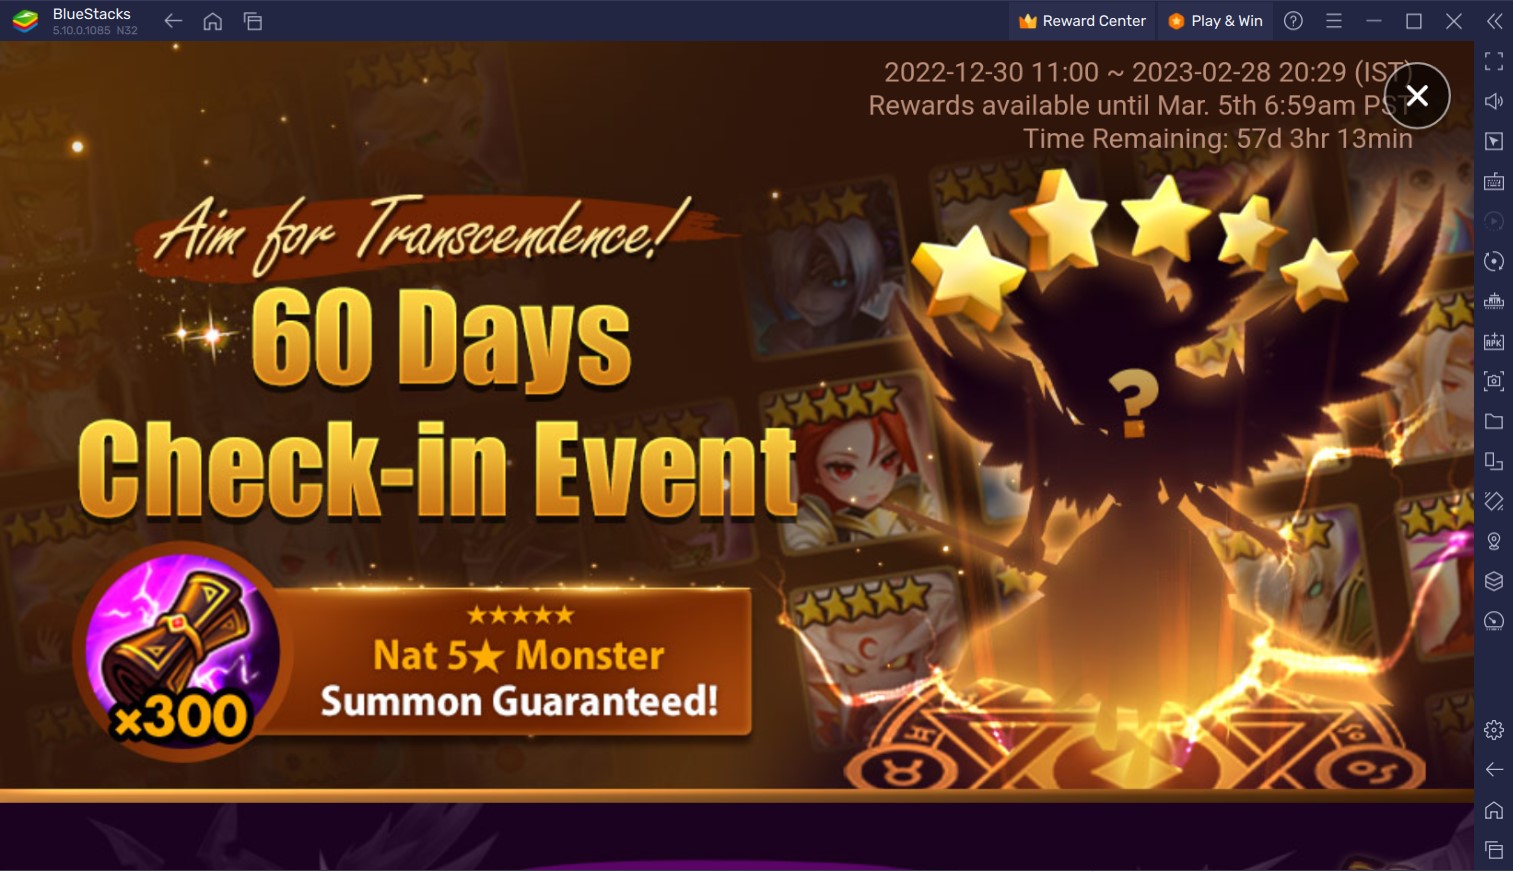 Summoners War: Sky Arena – Get Your Free Natural 5-Star with New Transcendence Event